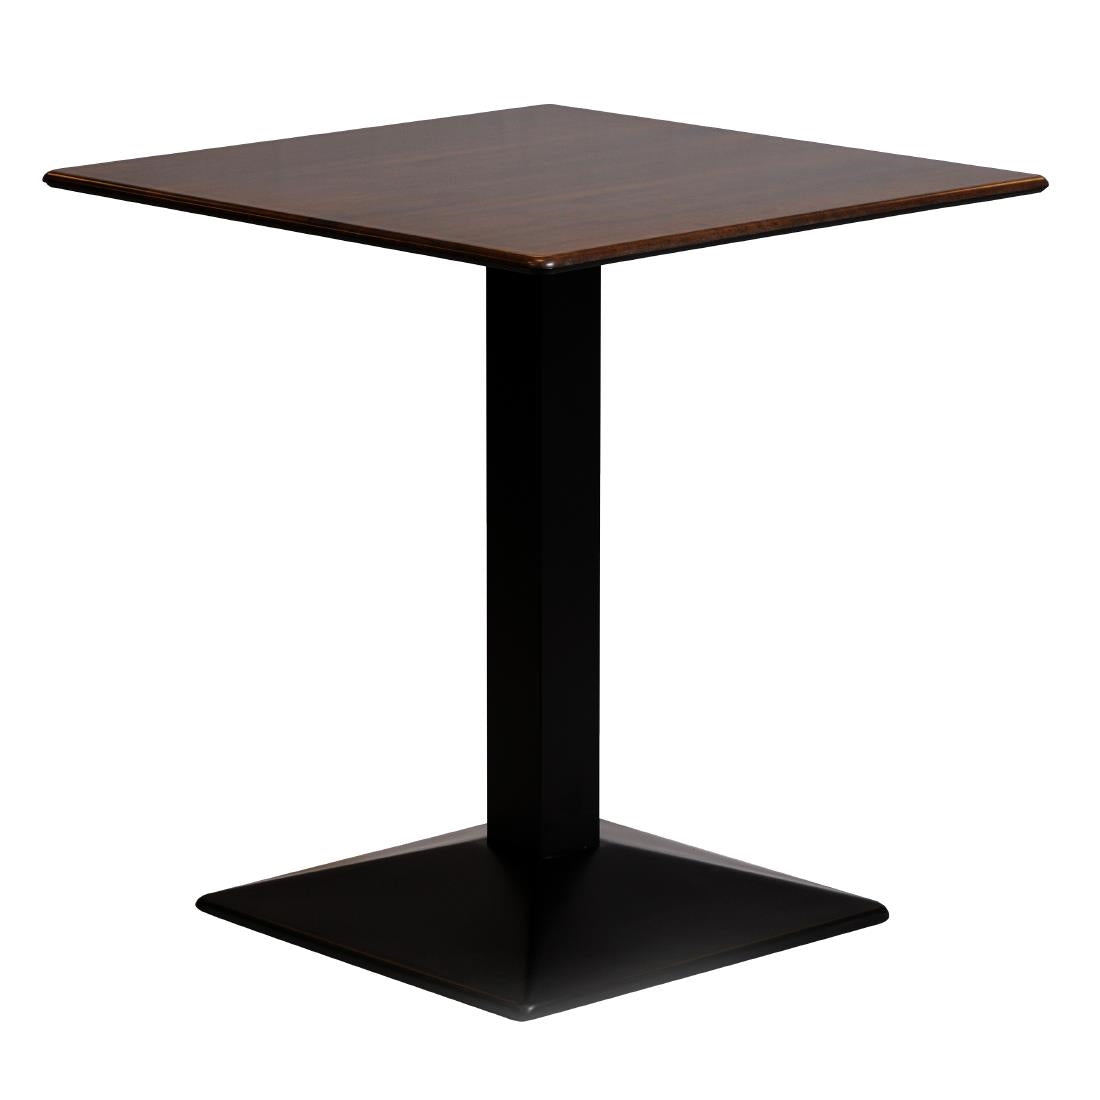 CZ817 Turin Metal Base Square Dining Table with Laminate Top Walnut 700mm JD Catering Equipment Solutions Ltd